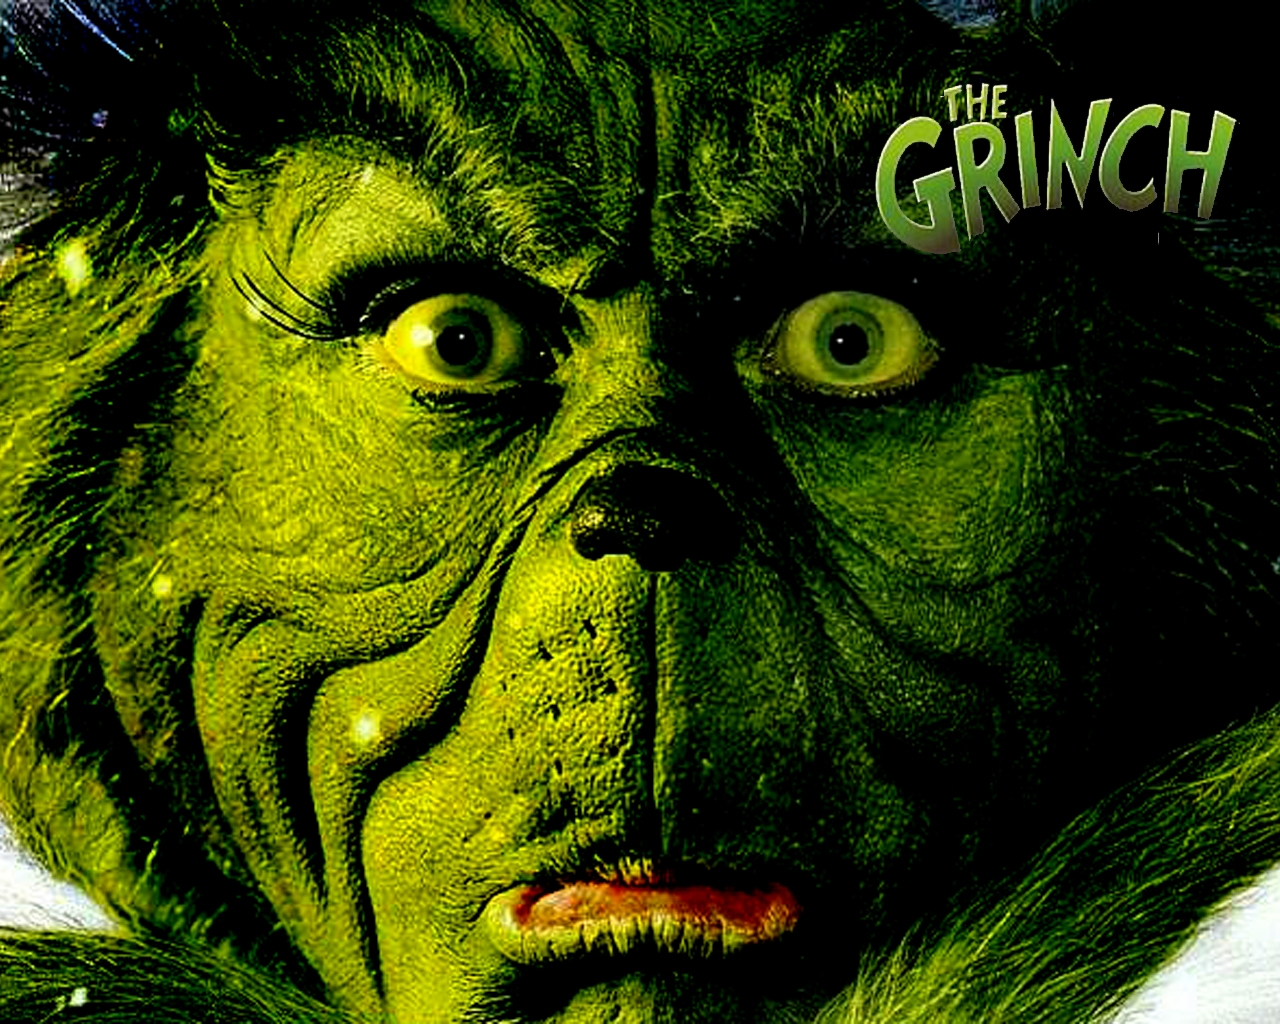 How The Grinch Stole Christmas Wallpaper